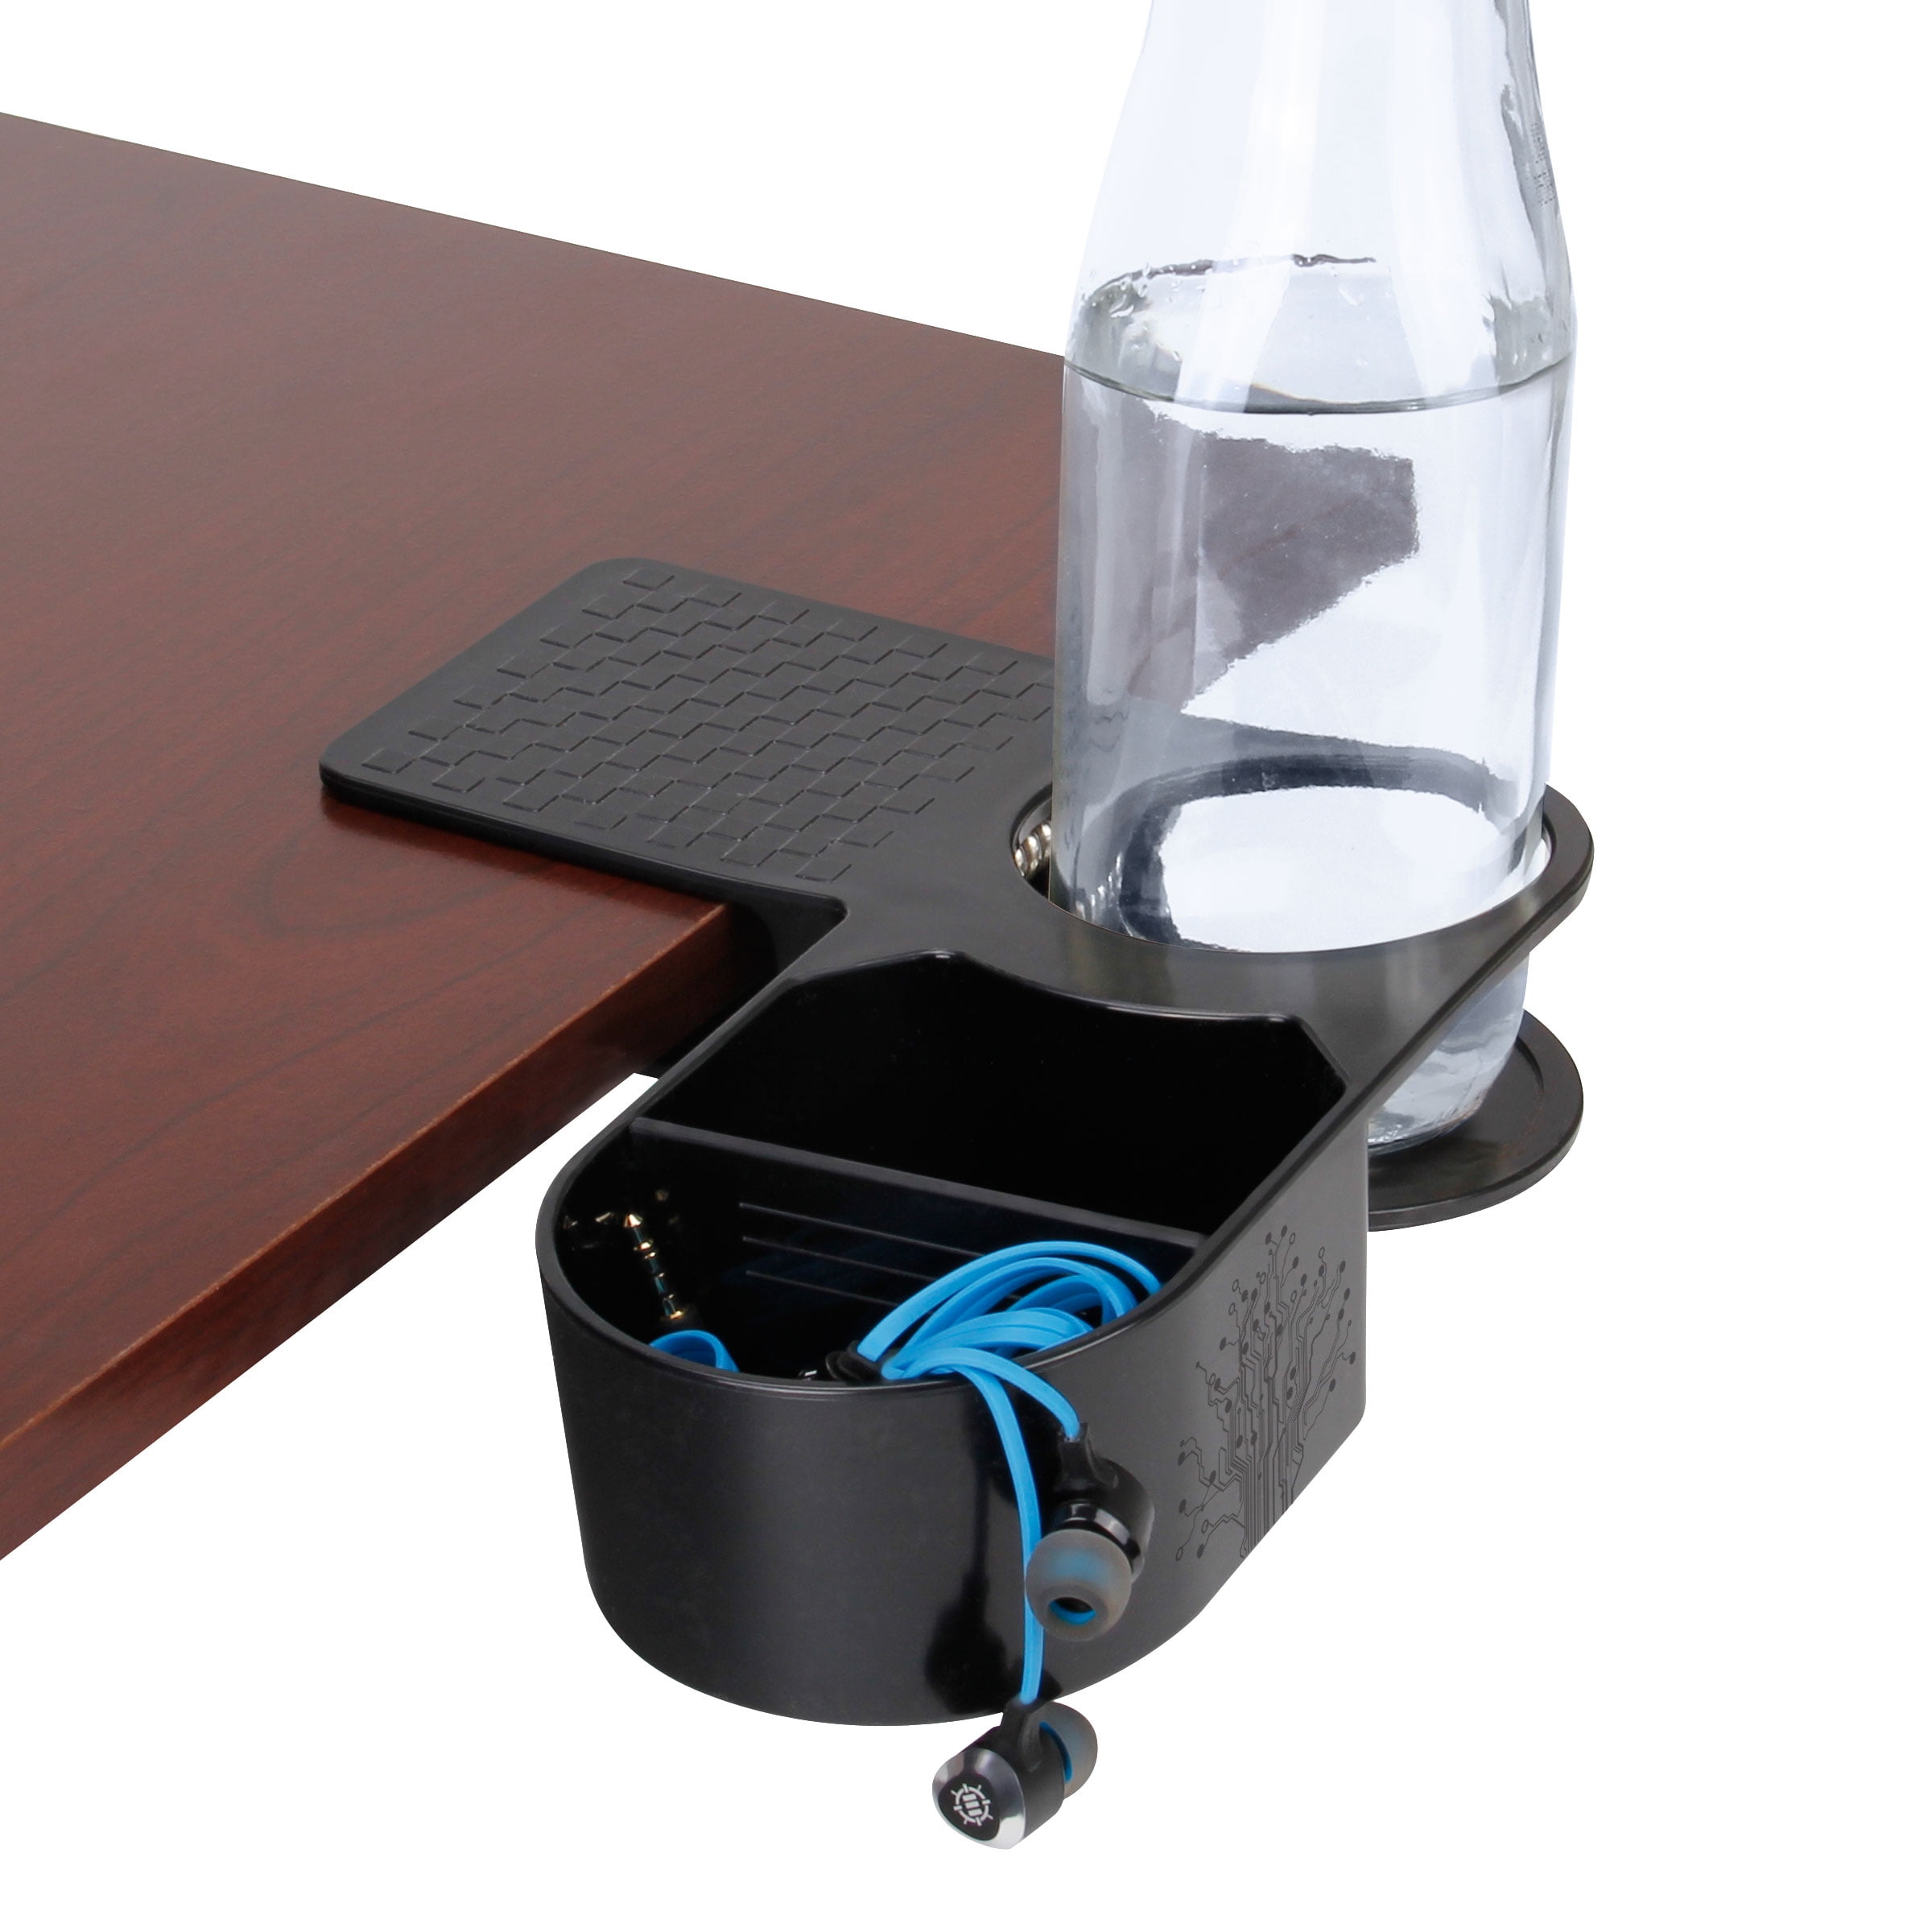 ENHANCE Clip On Cup Holder for Desk Desktop Organizer Clamp with Tray